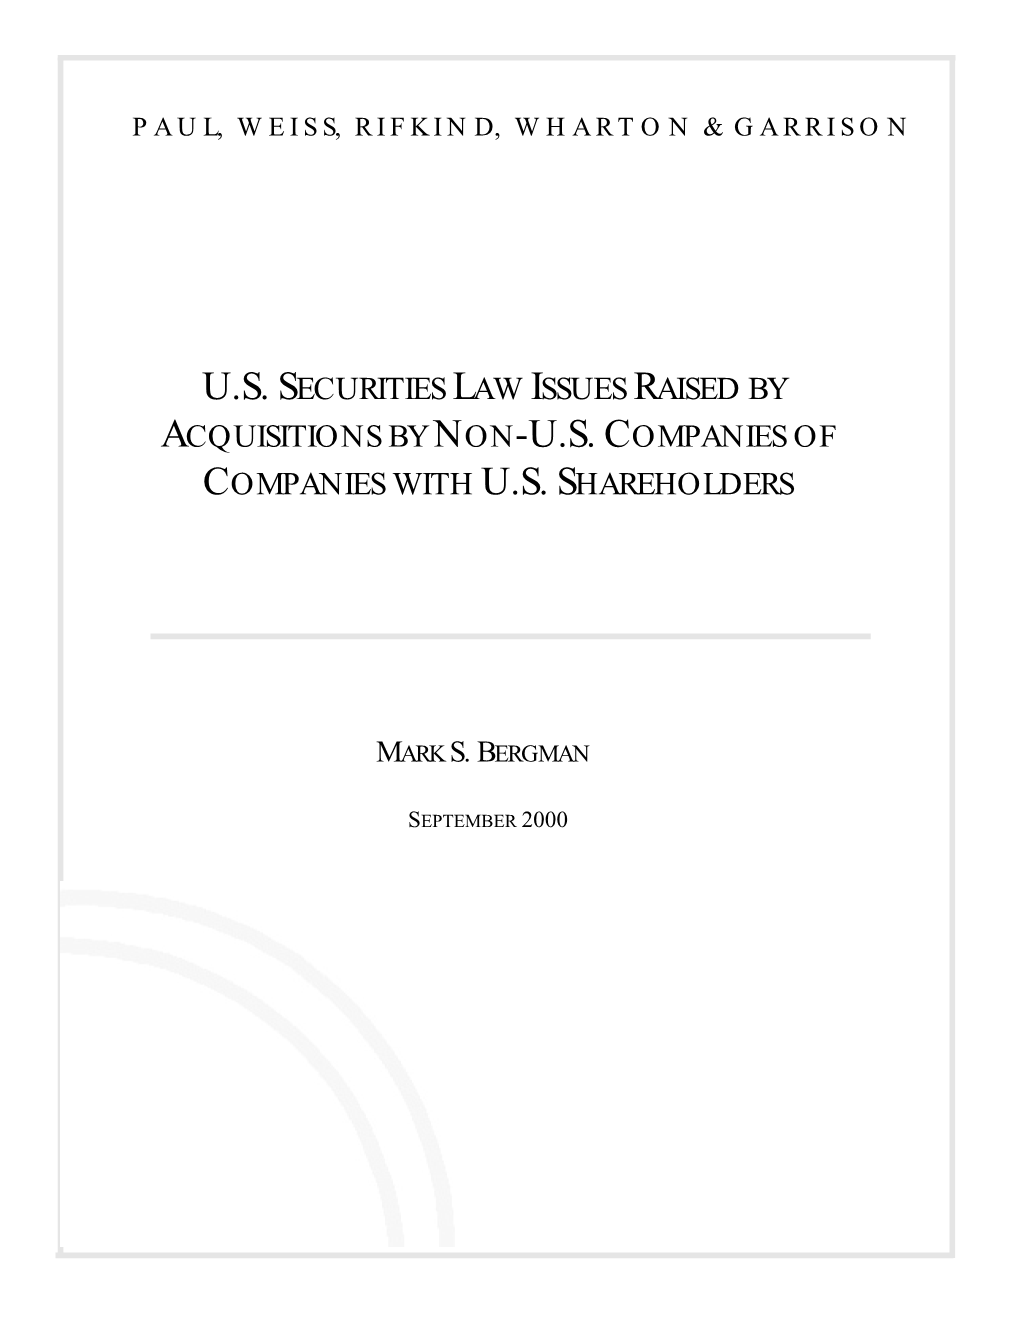 Us Securities Law Issues Raised by Acquisitions by Non-Us Companies